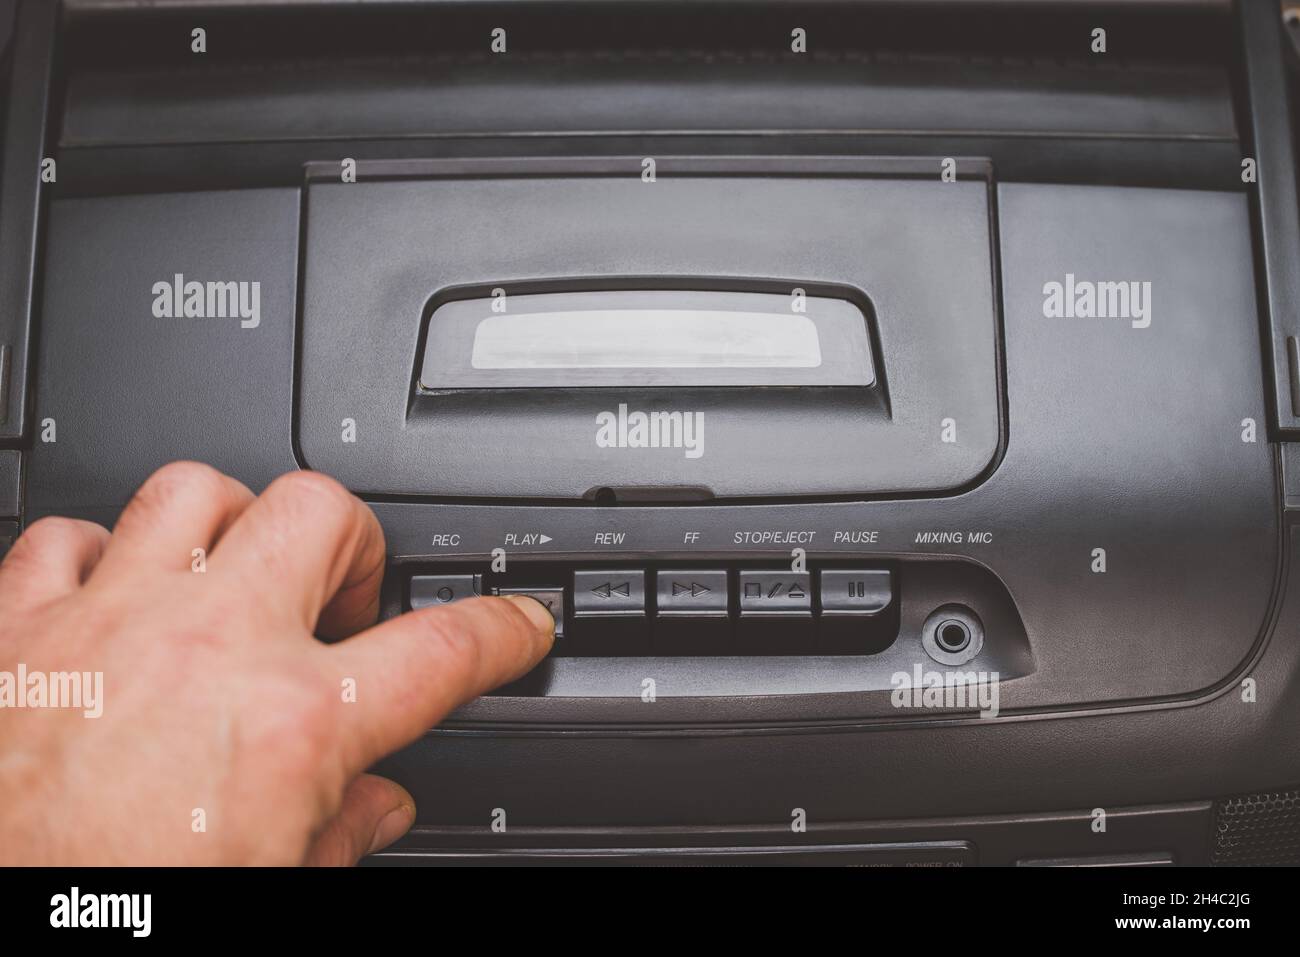 pressing buttons on a tape recorder, hand close-up on a black background Stock Photo